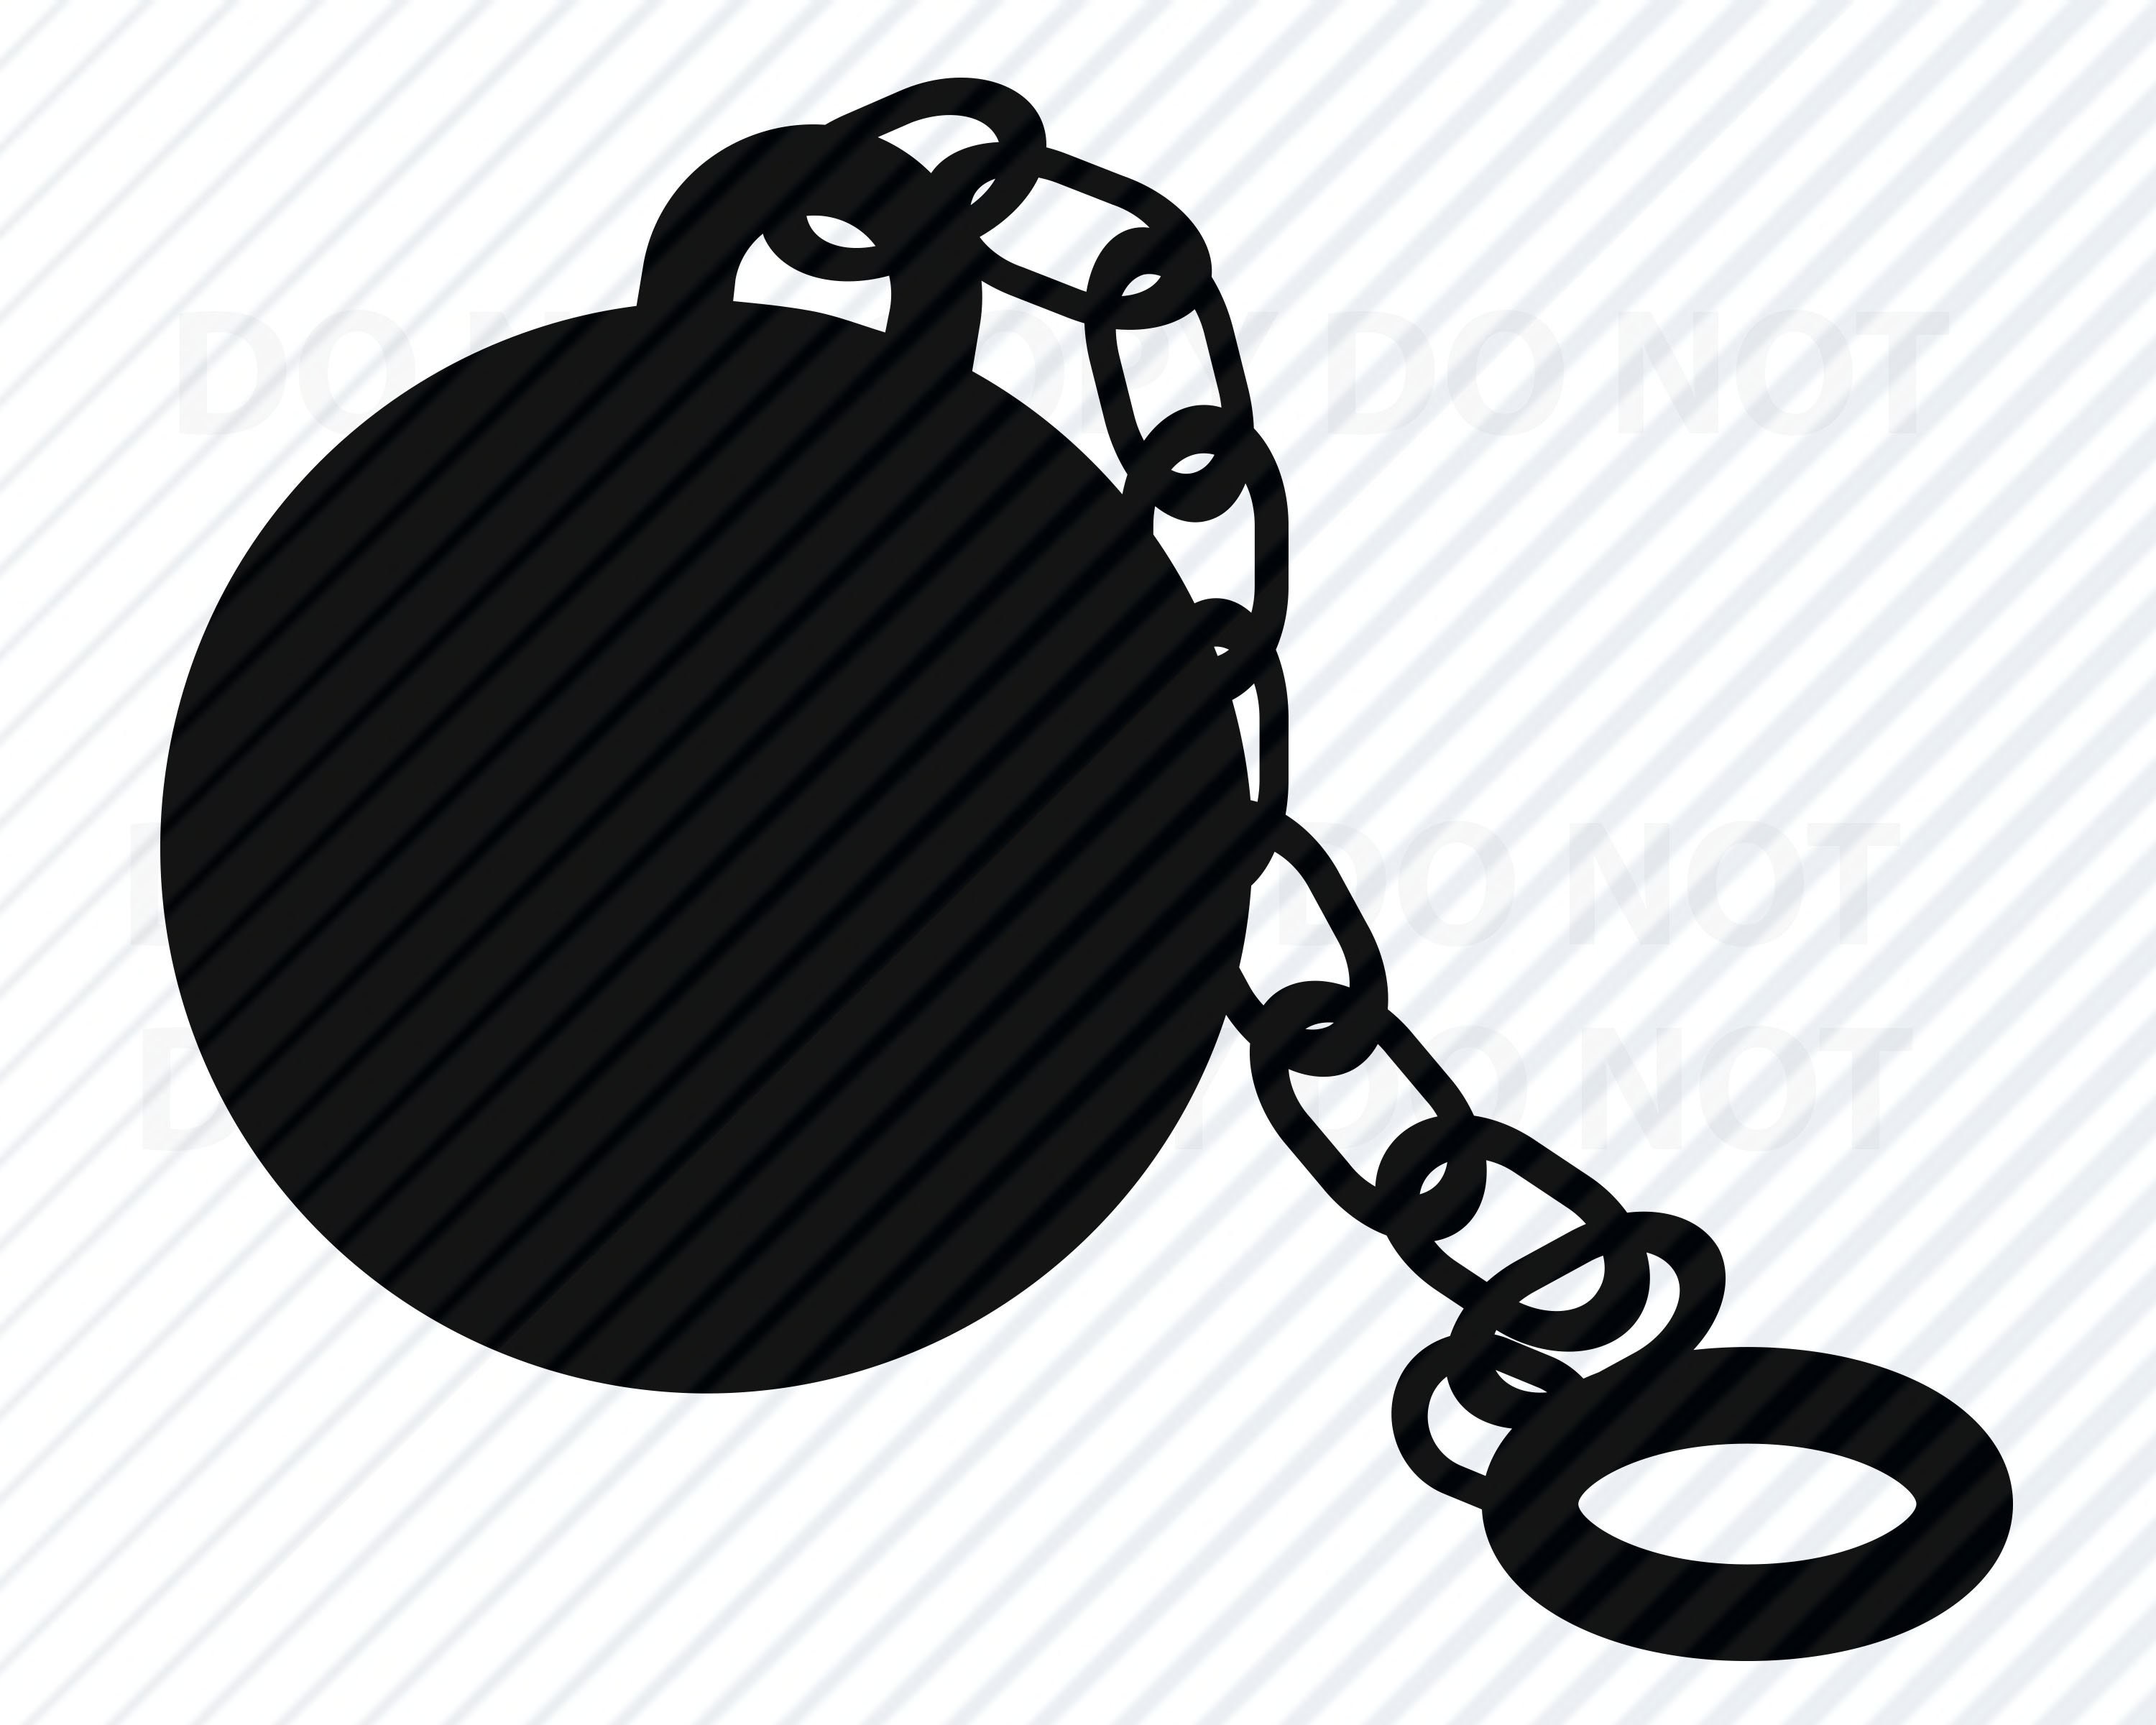 Ball and Chain SVG Files Chains Silhouette Clip Art SVG Eps, Png, Dxf  Clipart Prison Svg Vector Images Graphic Designs Logo 